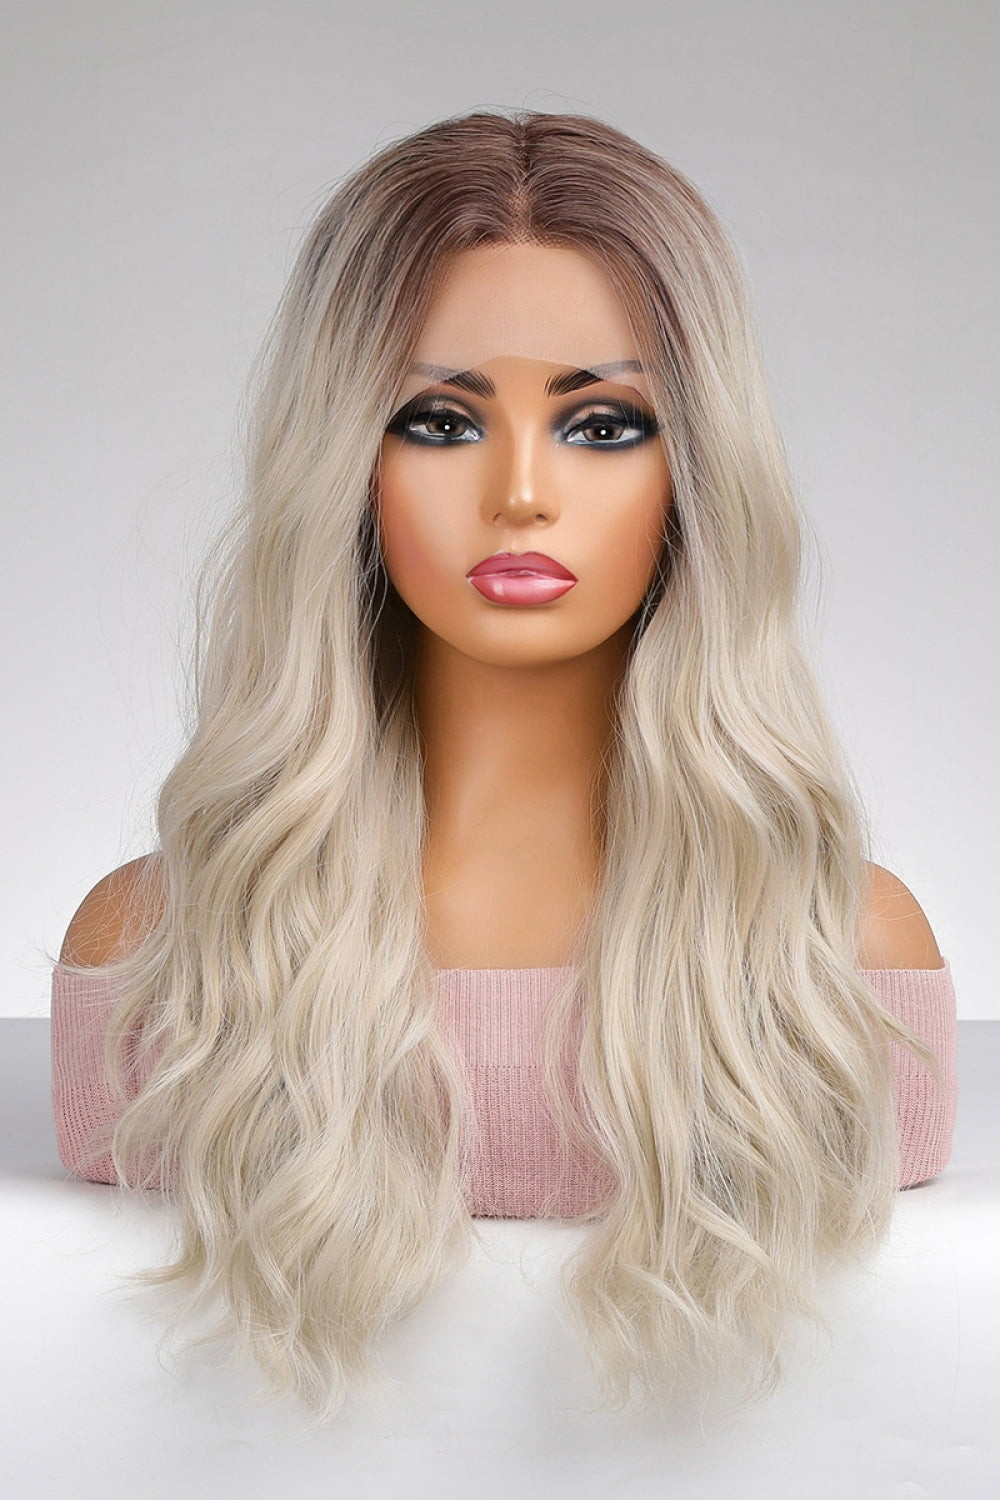 13-2-lace-front-wigs-synthetic-long-wave-26-150-density-in-blonde-balayage